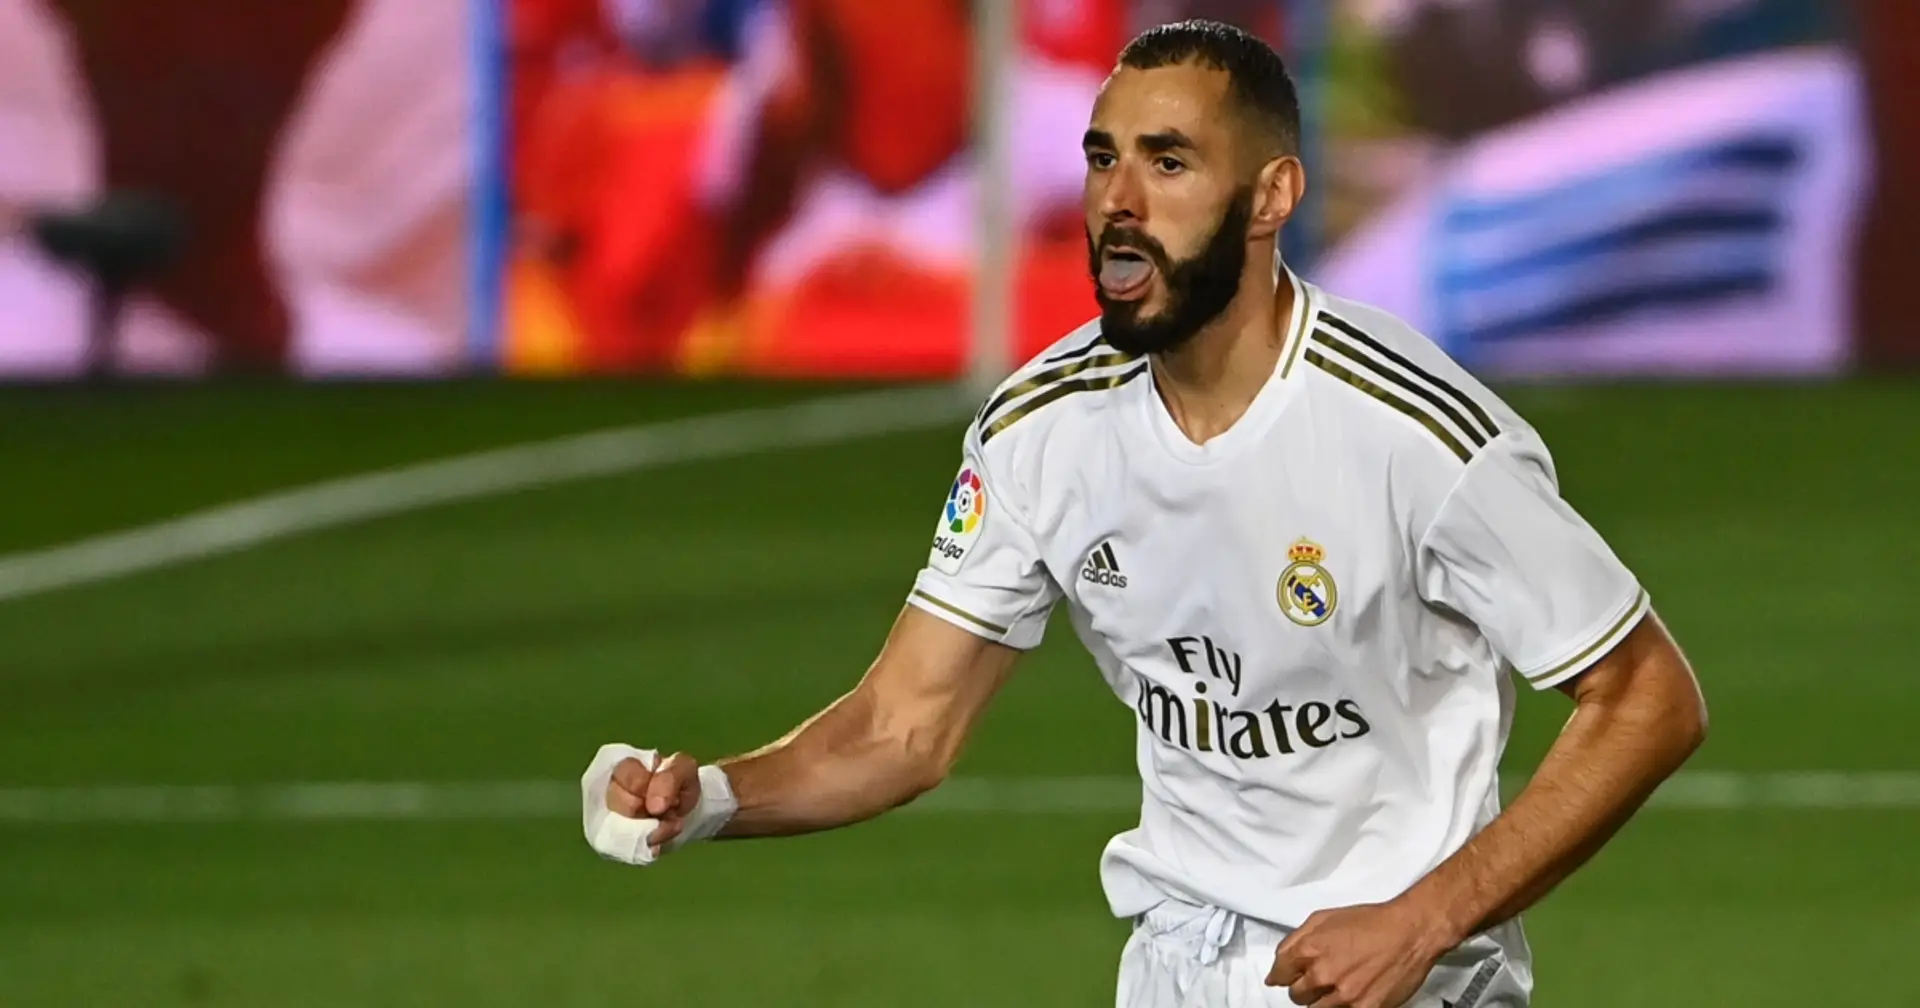 Benzema's impressive Champions League stats show why he deserves to start against Gladbach 